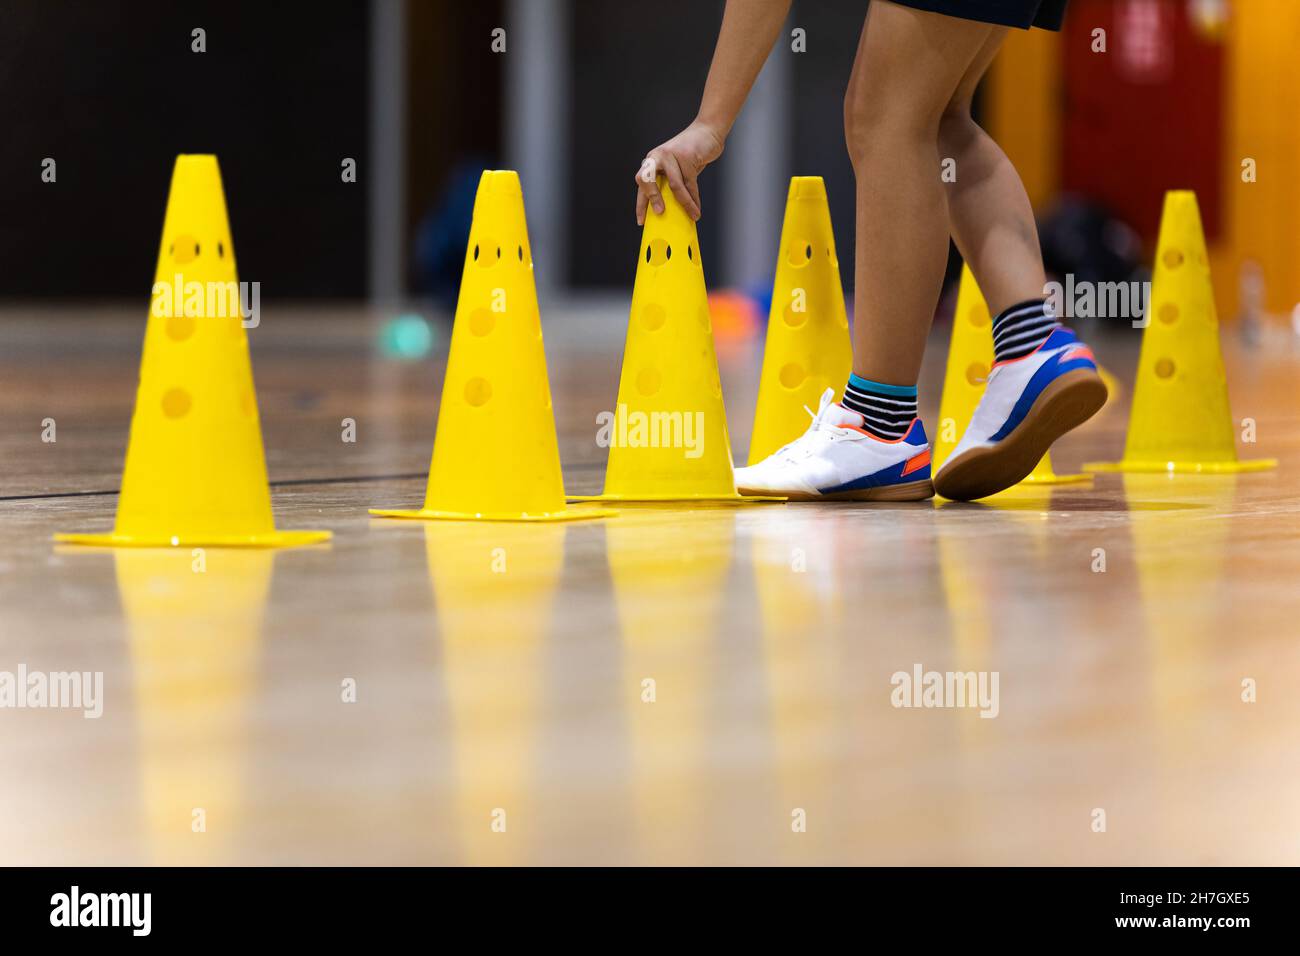 Row of Yellow Training Cones at Indoor Practice Field. Young Player on Training With Practice Trail. Physical Education Class For Youths Stock Photo